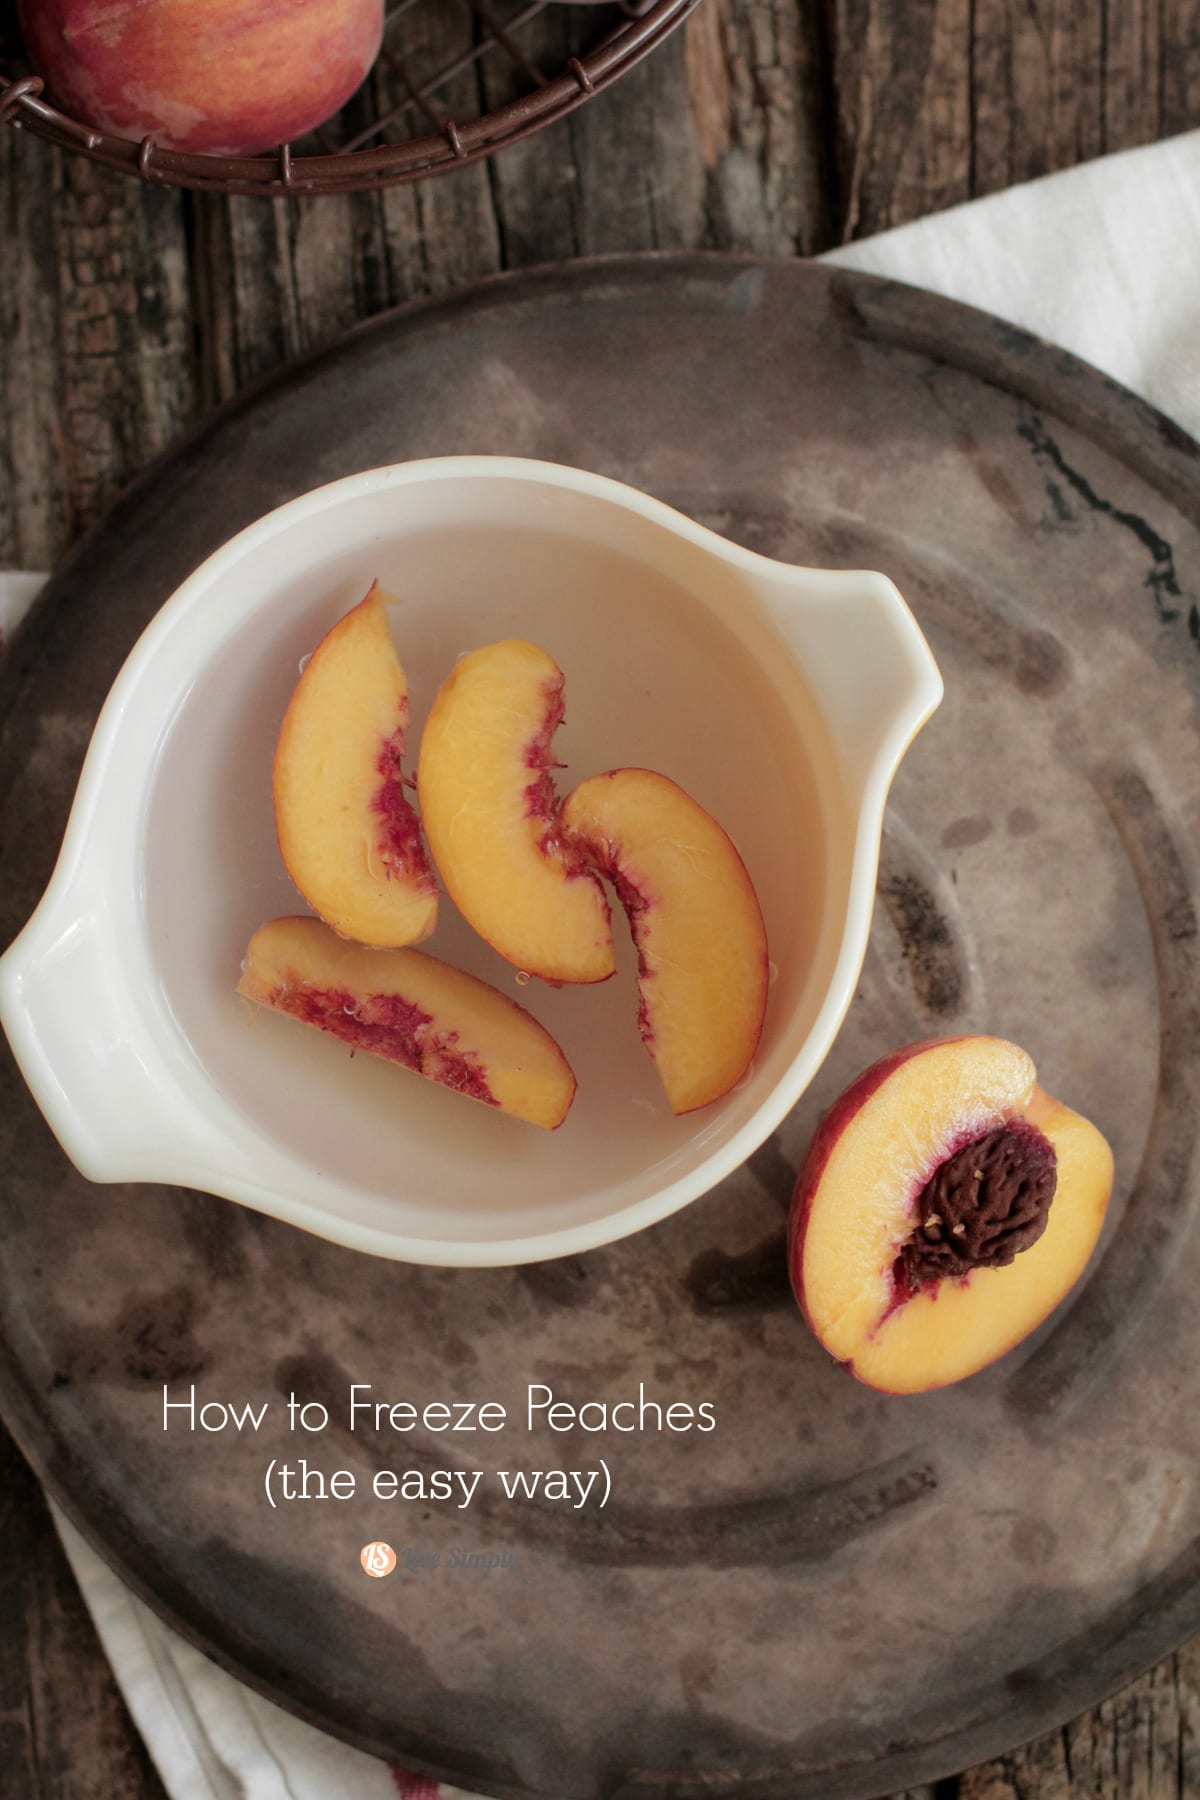 How to Freeze Peaches (the easy way)